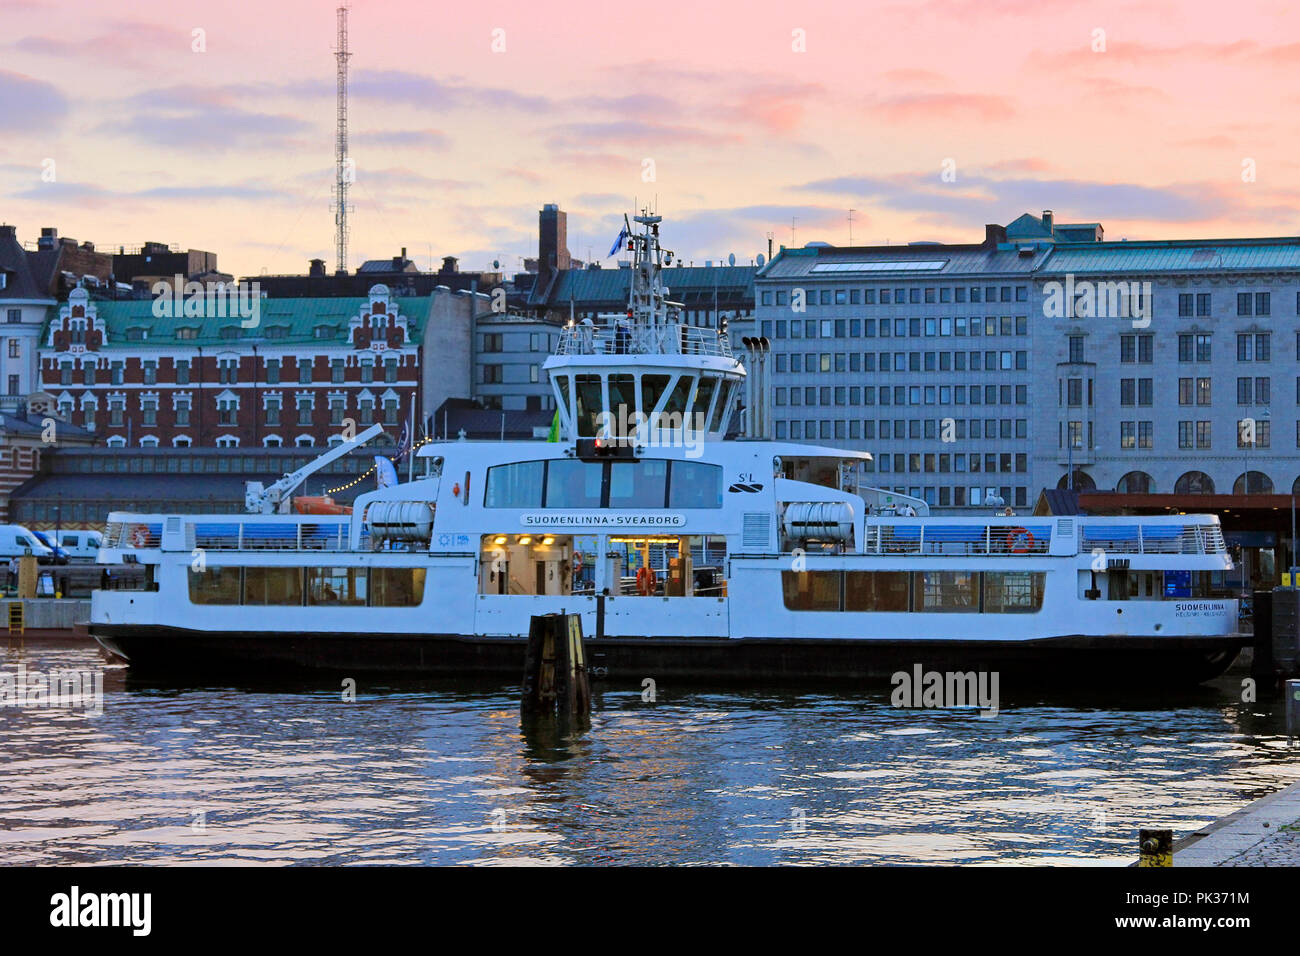 HSL ferry to Suomenlinna Sea Fortress at Market Square in autumn at sunset time. Helsinki, Finland - September 5, 2018. Stock Photo